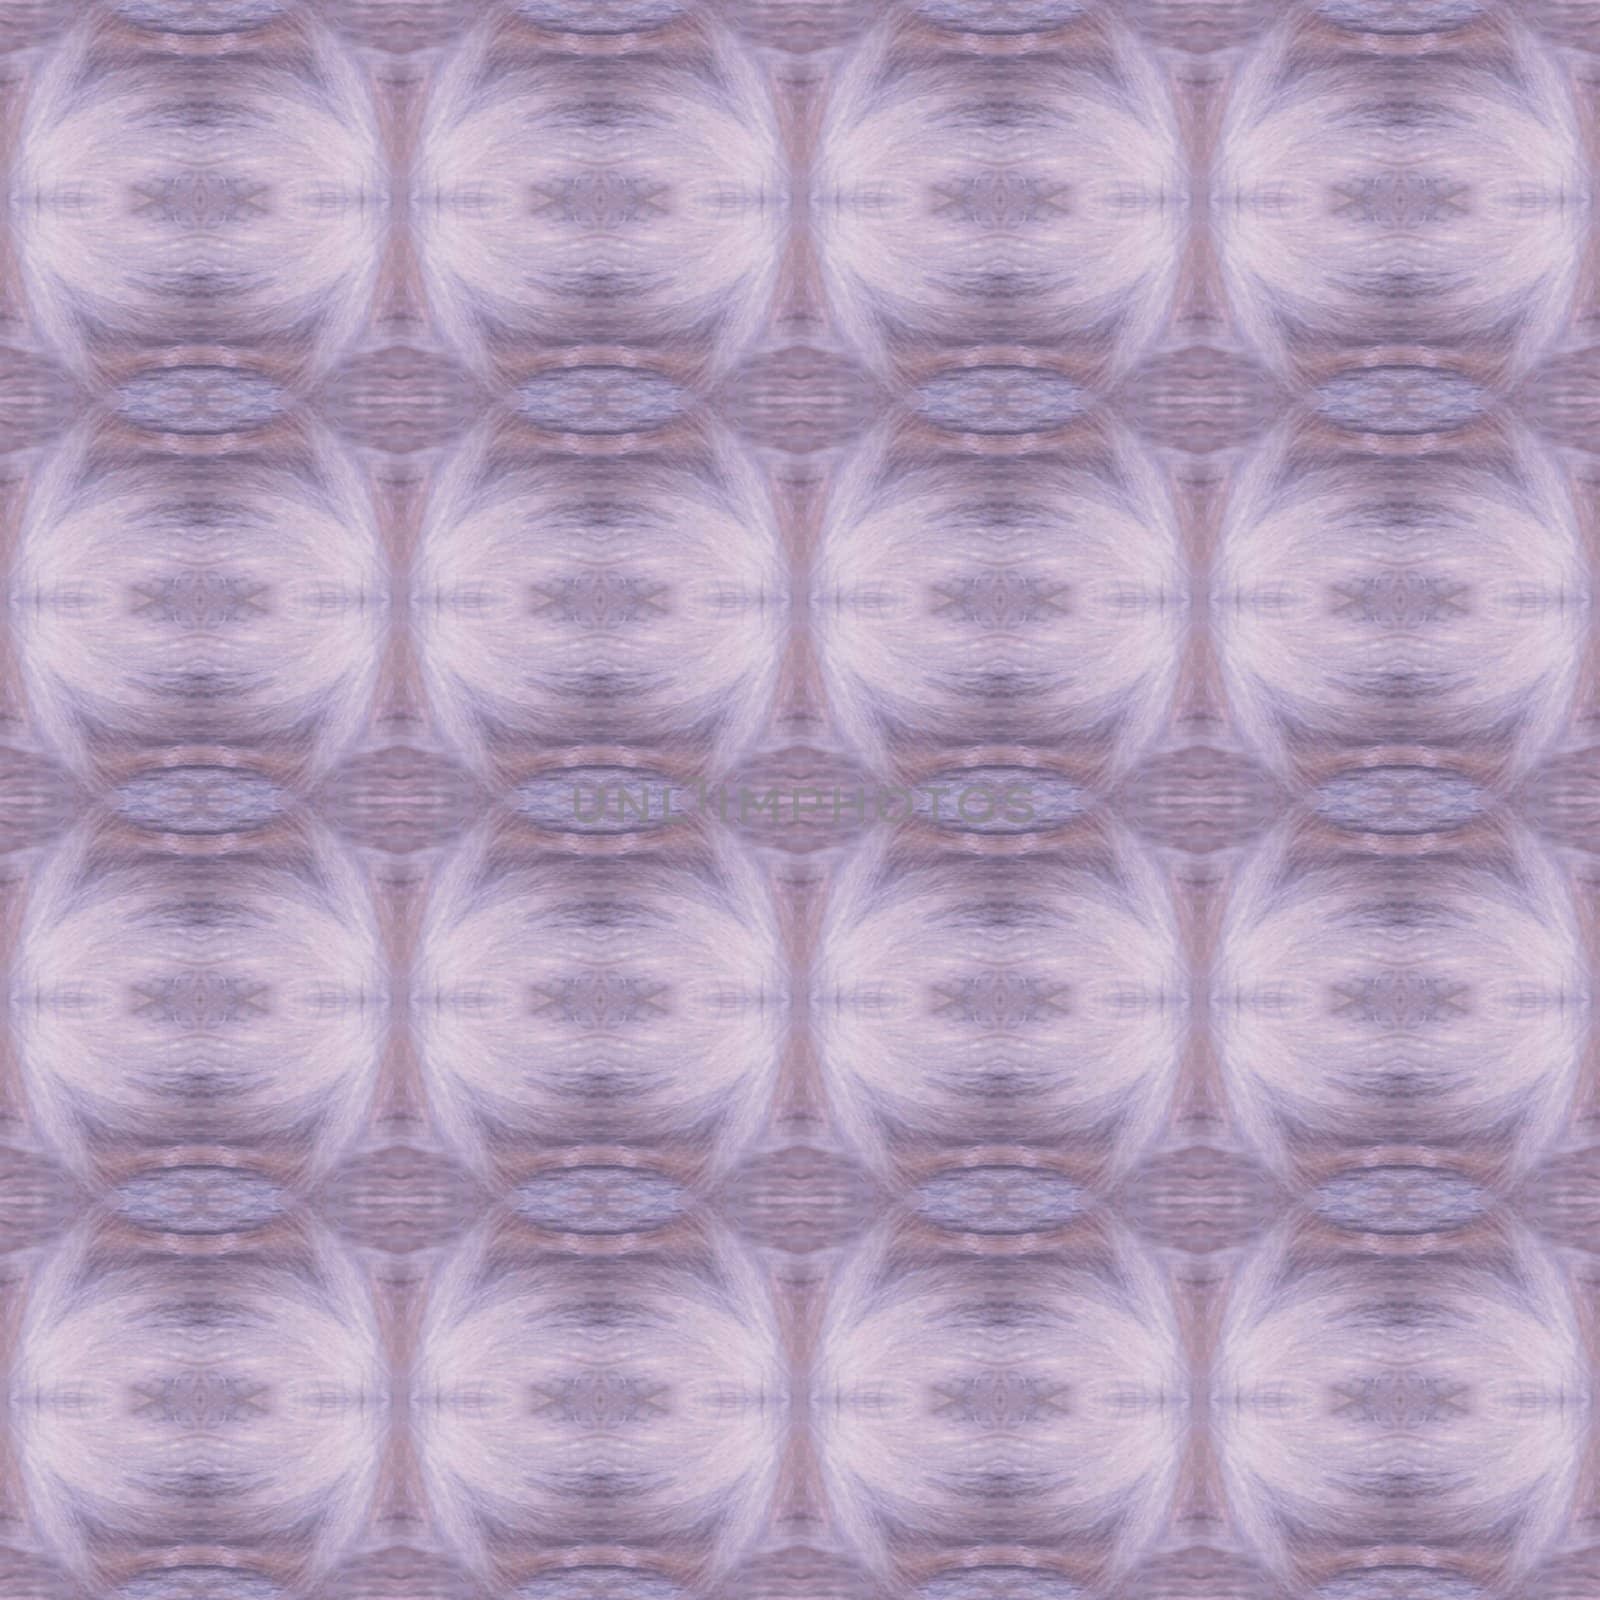 Lilac Seamless Background, Tiles or Border by Nonboe